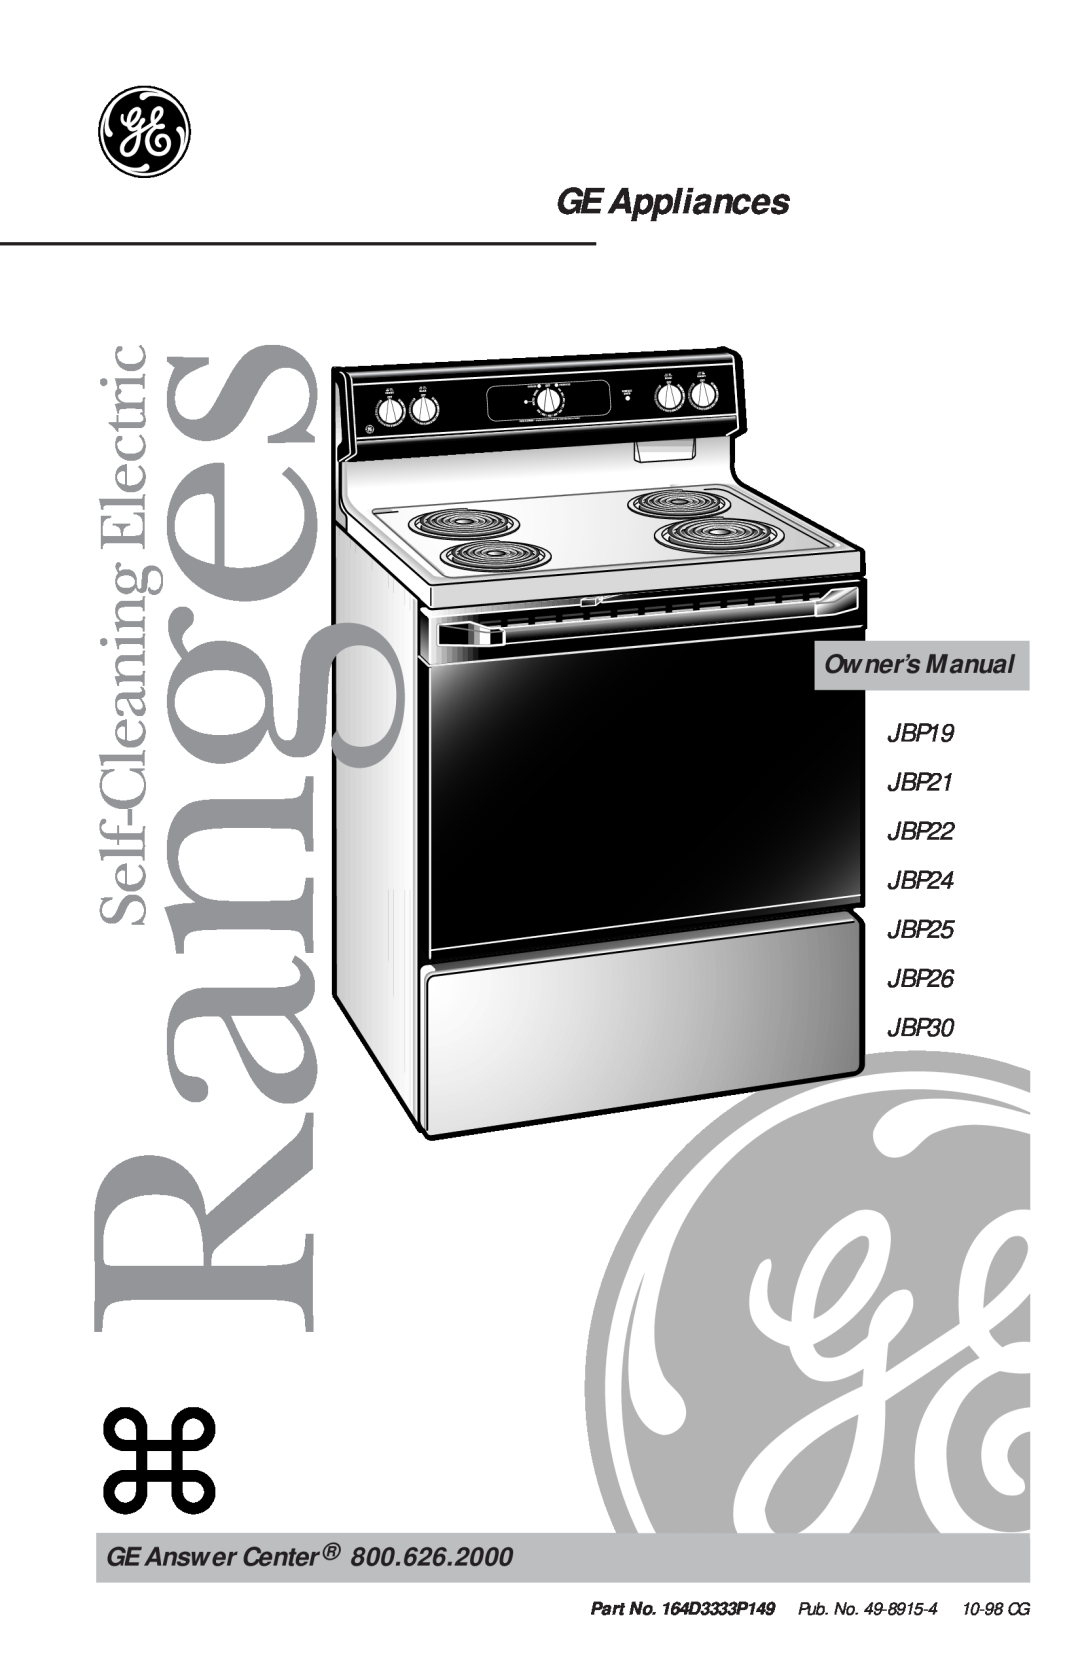 GE JBP20 warranty Useand Care & Installation Guide, Self-Cleaning Electric Range, GE Appliances, JBP25, Care and Cleaning 